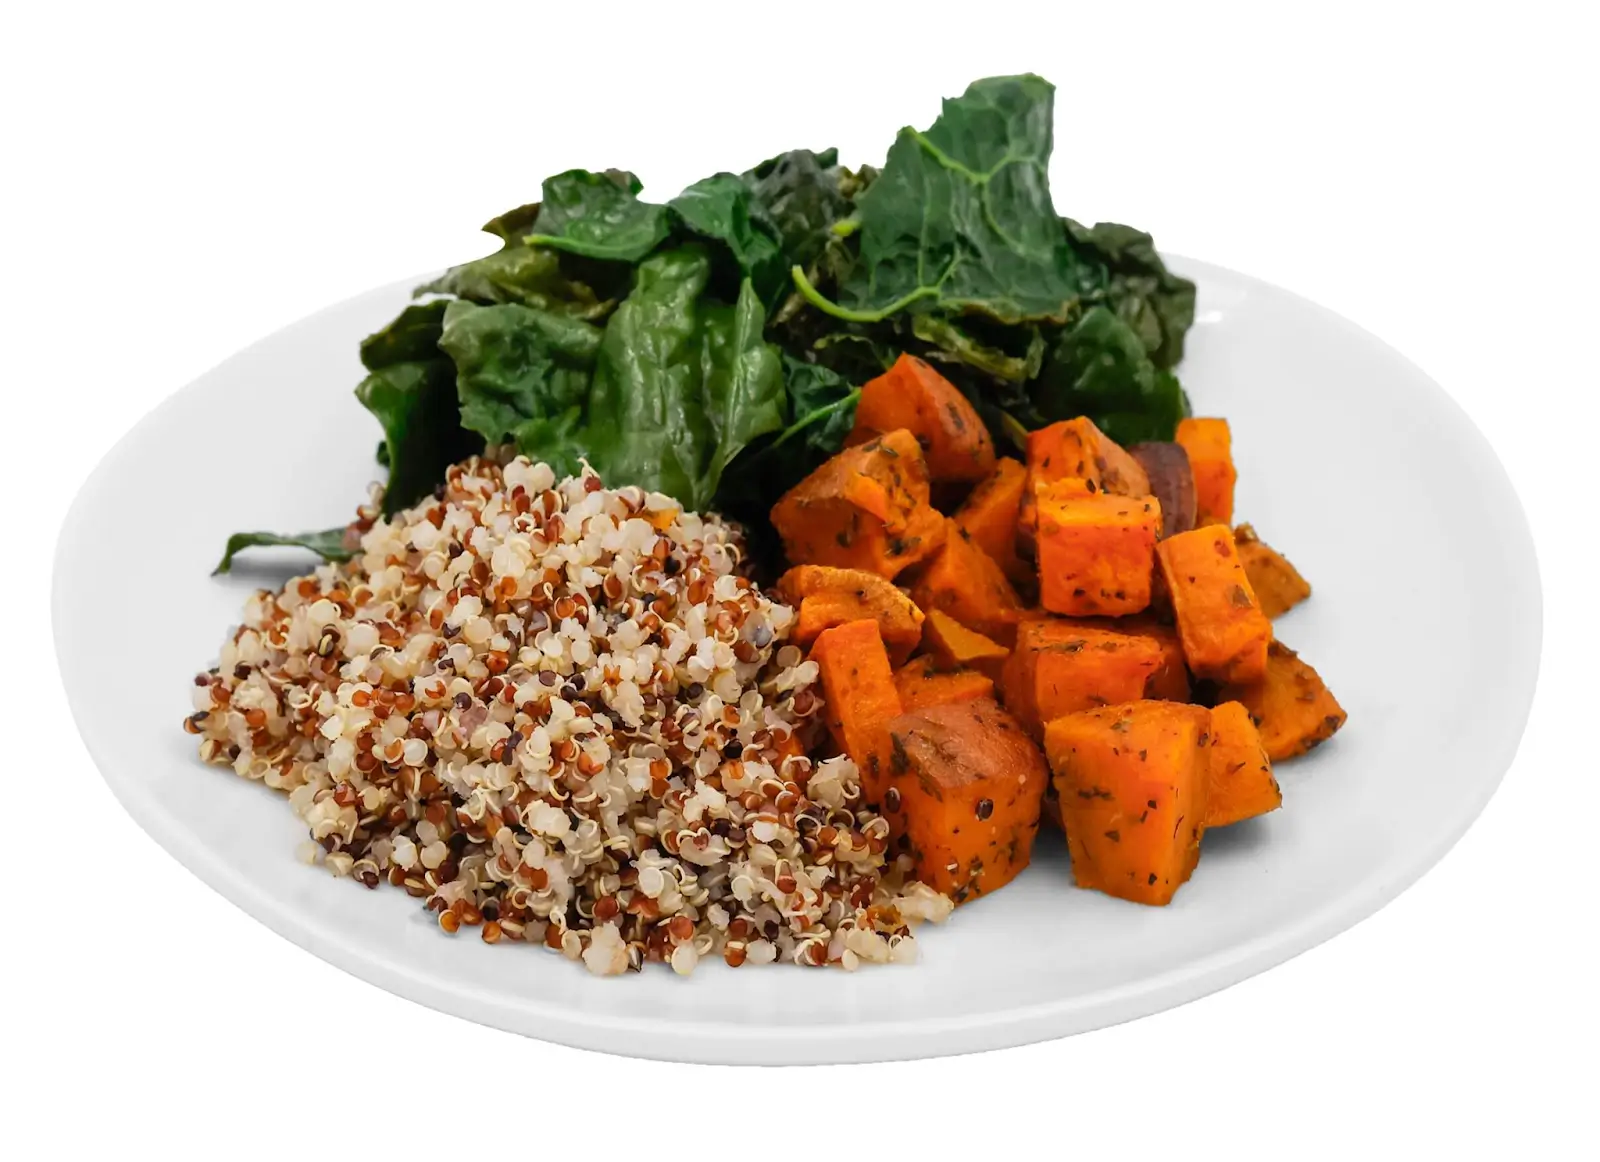 A plate with a bowl of greens, sweet potatoes, and quinoa, creating a healthy and colorful meal.